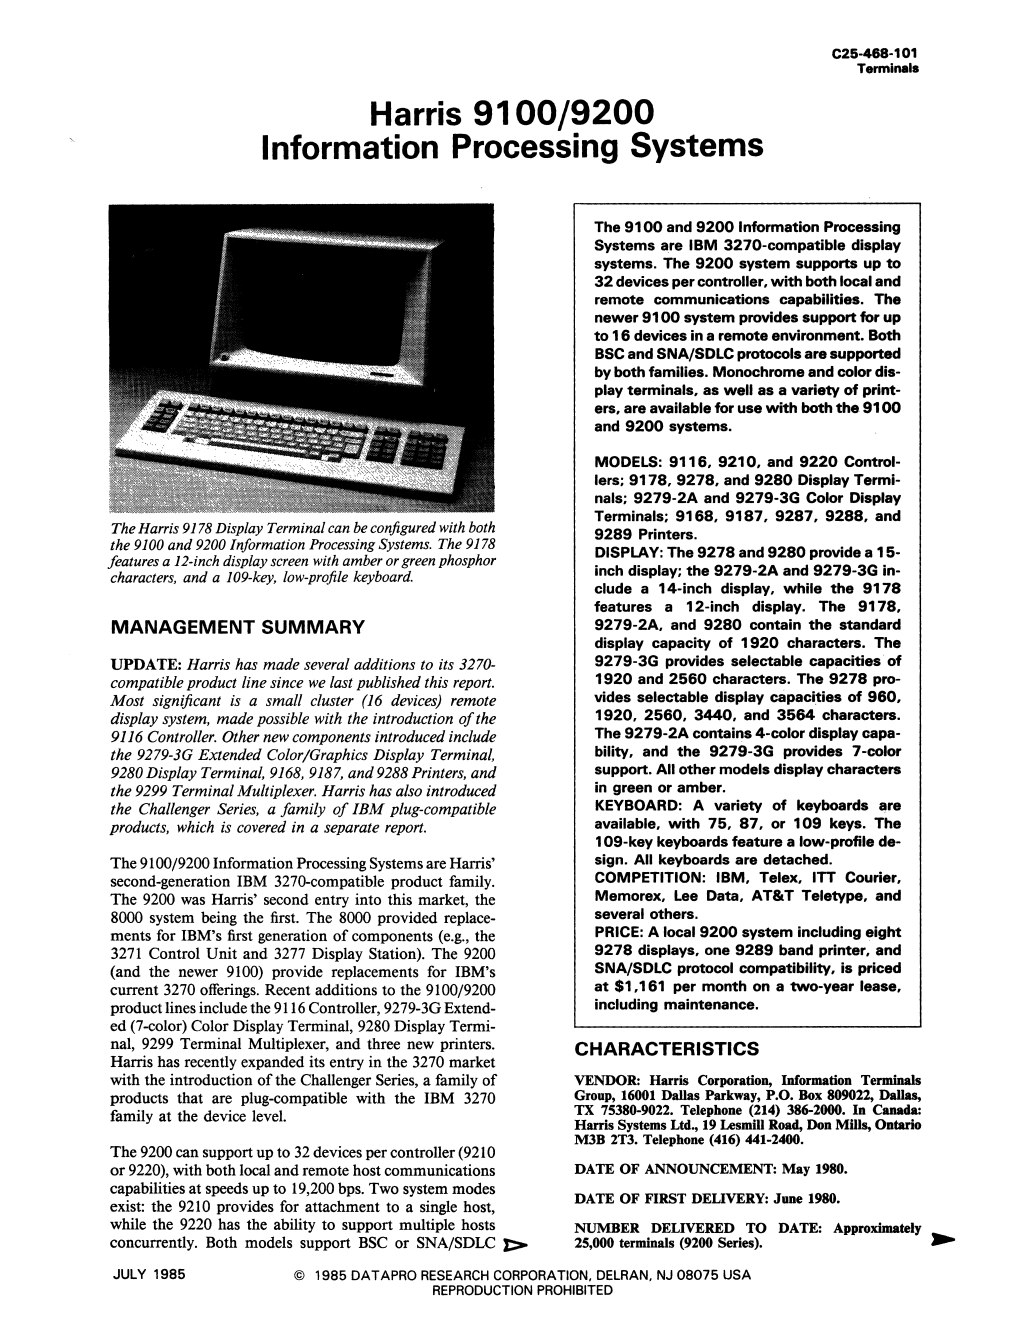 Harris 9100/9200 Information Processing Systems